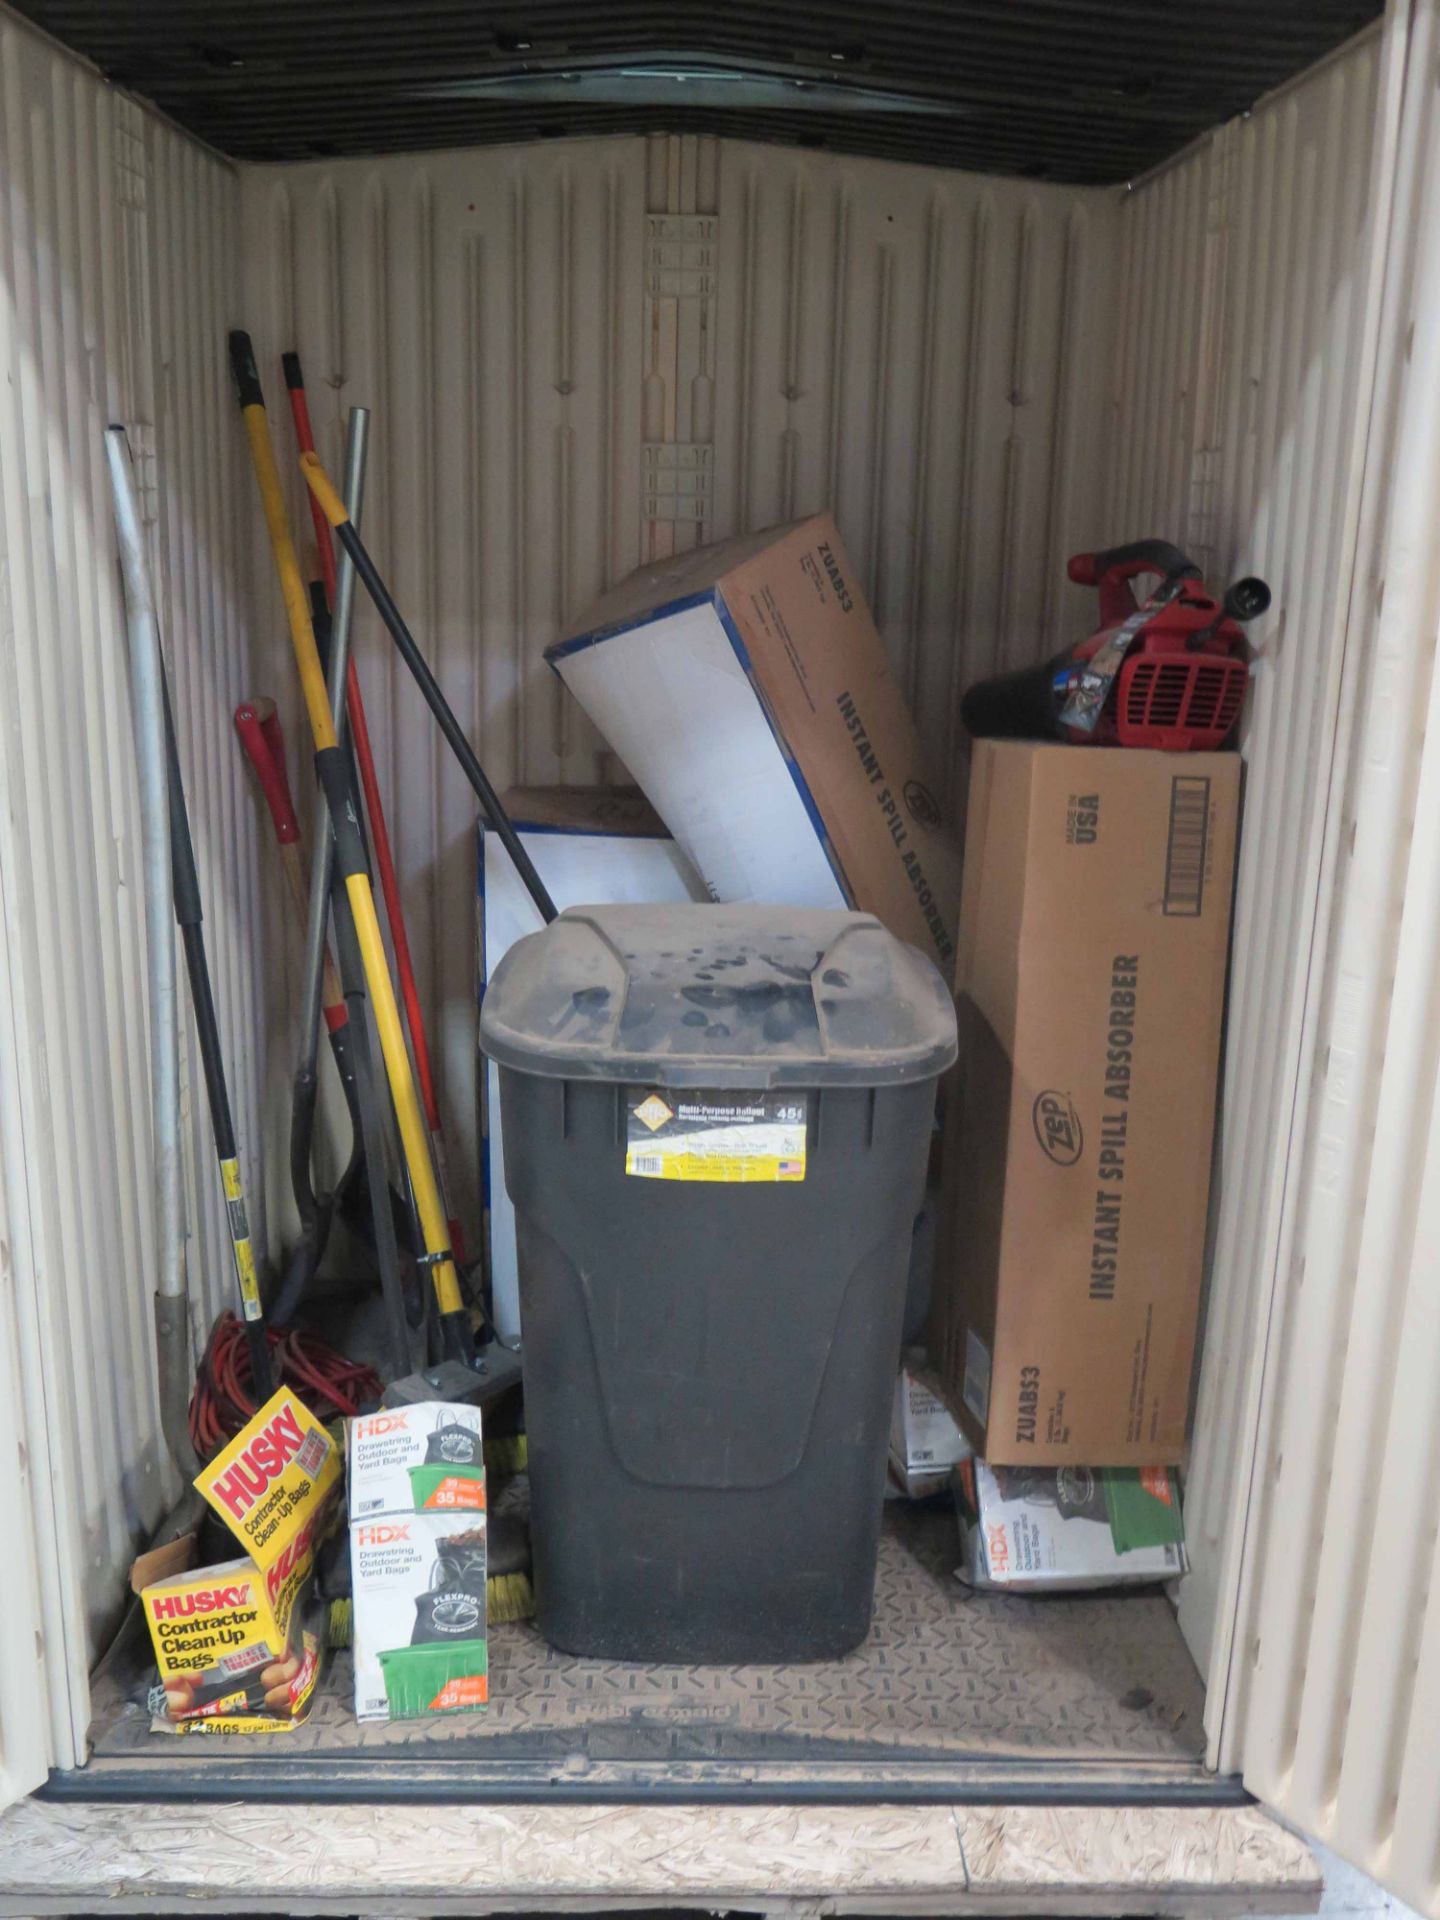 SHED (ON PALLET), RUBBERMAID 4' X 4', w/complete spill clean up supplies including: brooms, shovels, - Image 2 of 2